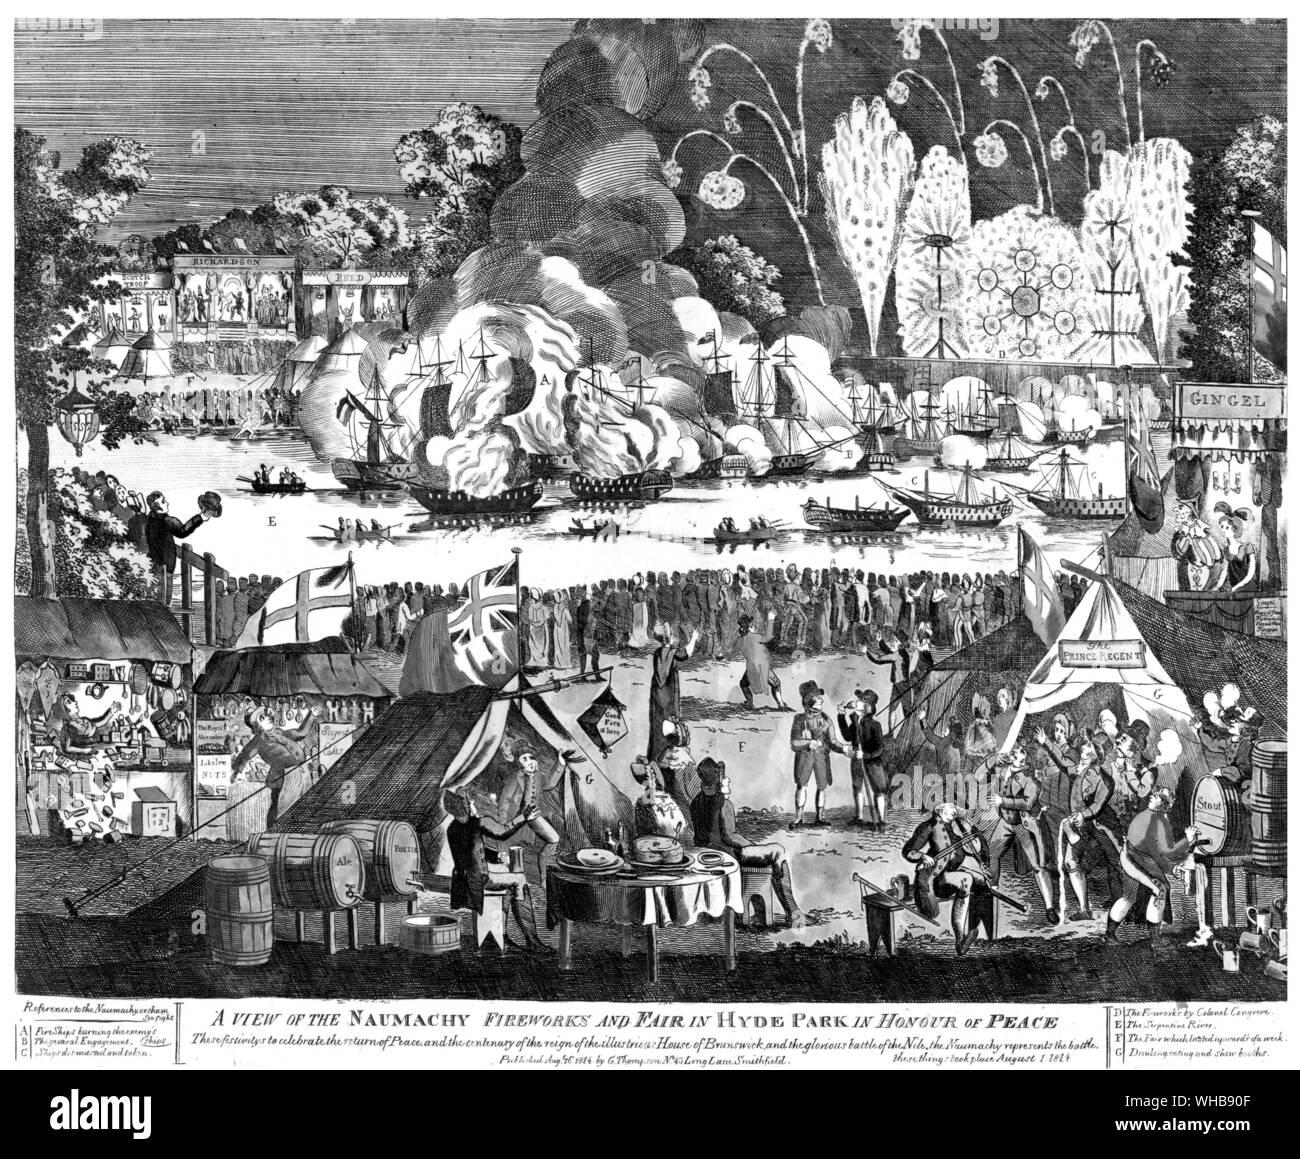 A view of the Naumachy fireworks and fair in Hyde Park in honour of peace. These festivities to celebrate the return of peace and the centenary of the reign of the illustrious House of Brunswick and the glorious Battle of the Nile - the Naumachy represents the battle. Published 1814 by G. Thomson, No. 43 Long Lane, Smithfield, London.. Stock Photo